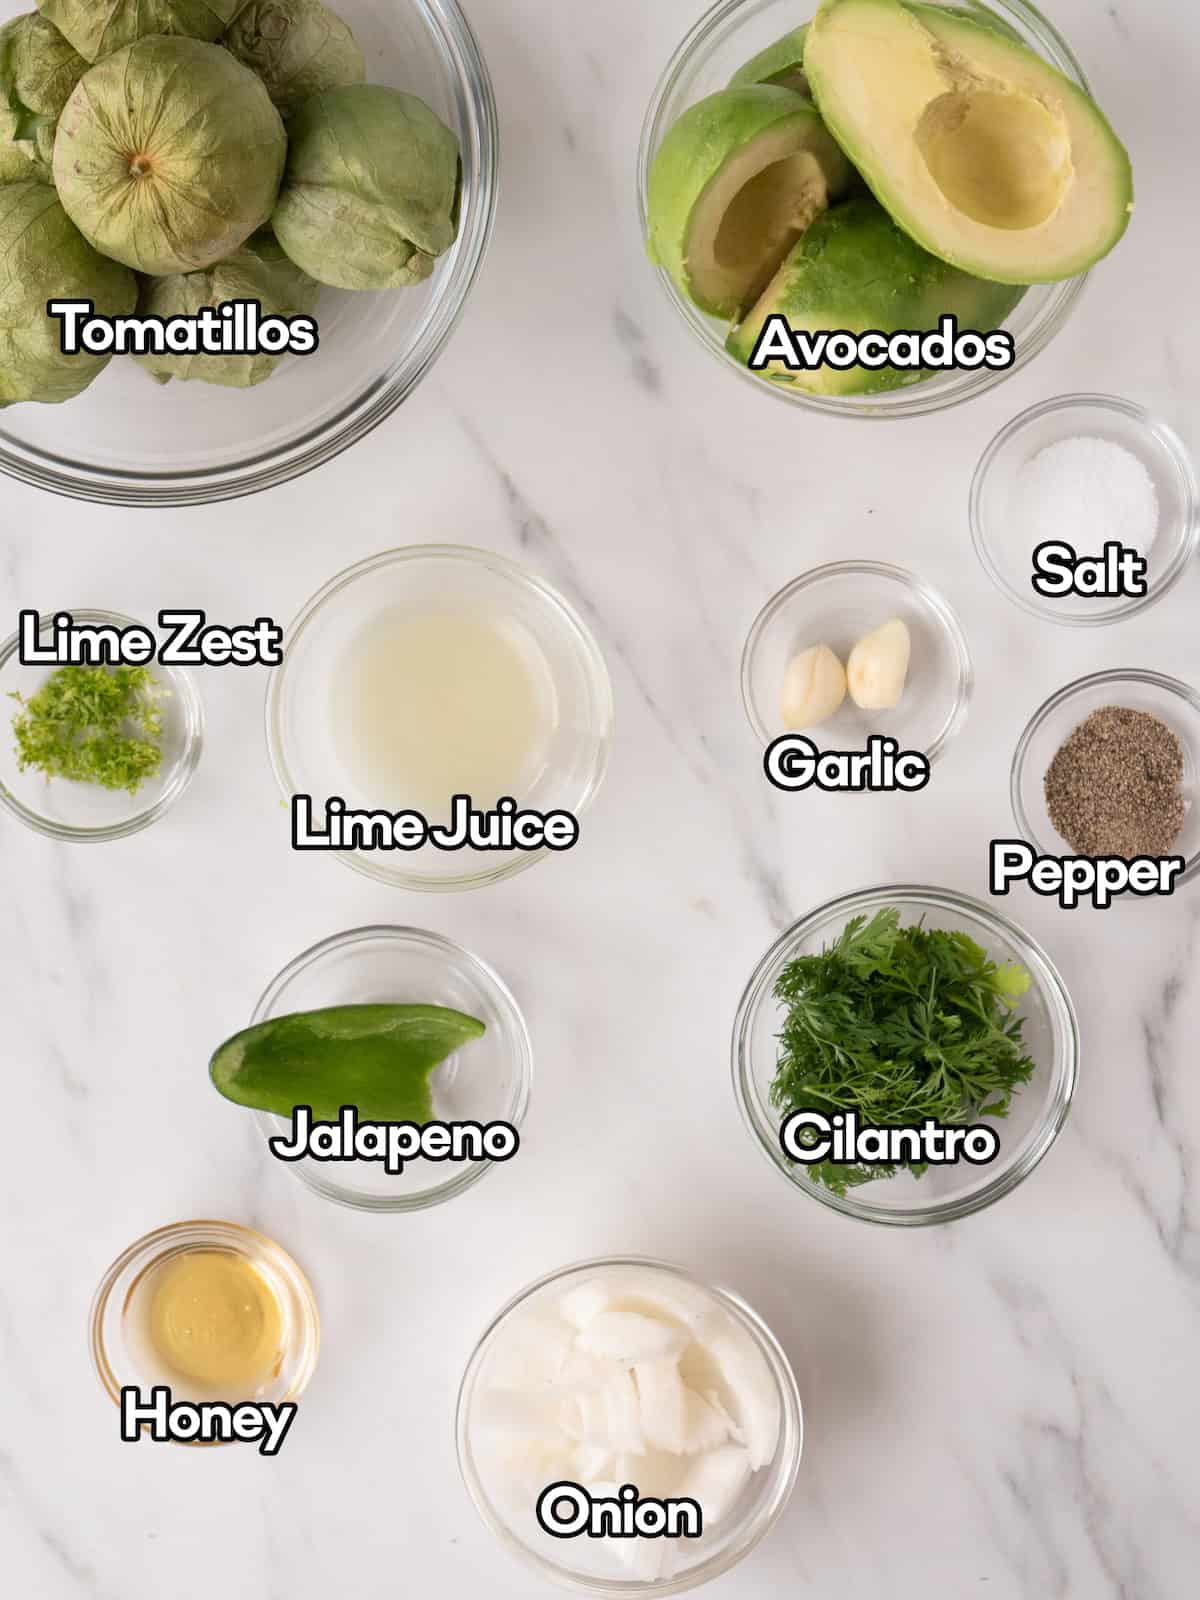 Mise en place of all ingredients to make tomatillo avocado salsa.